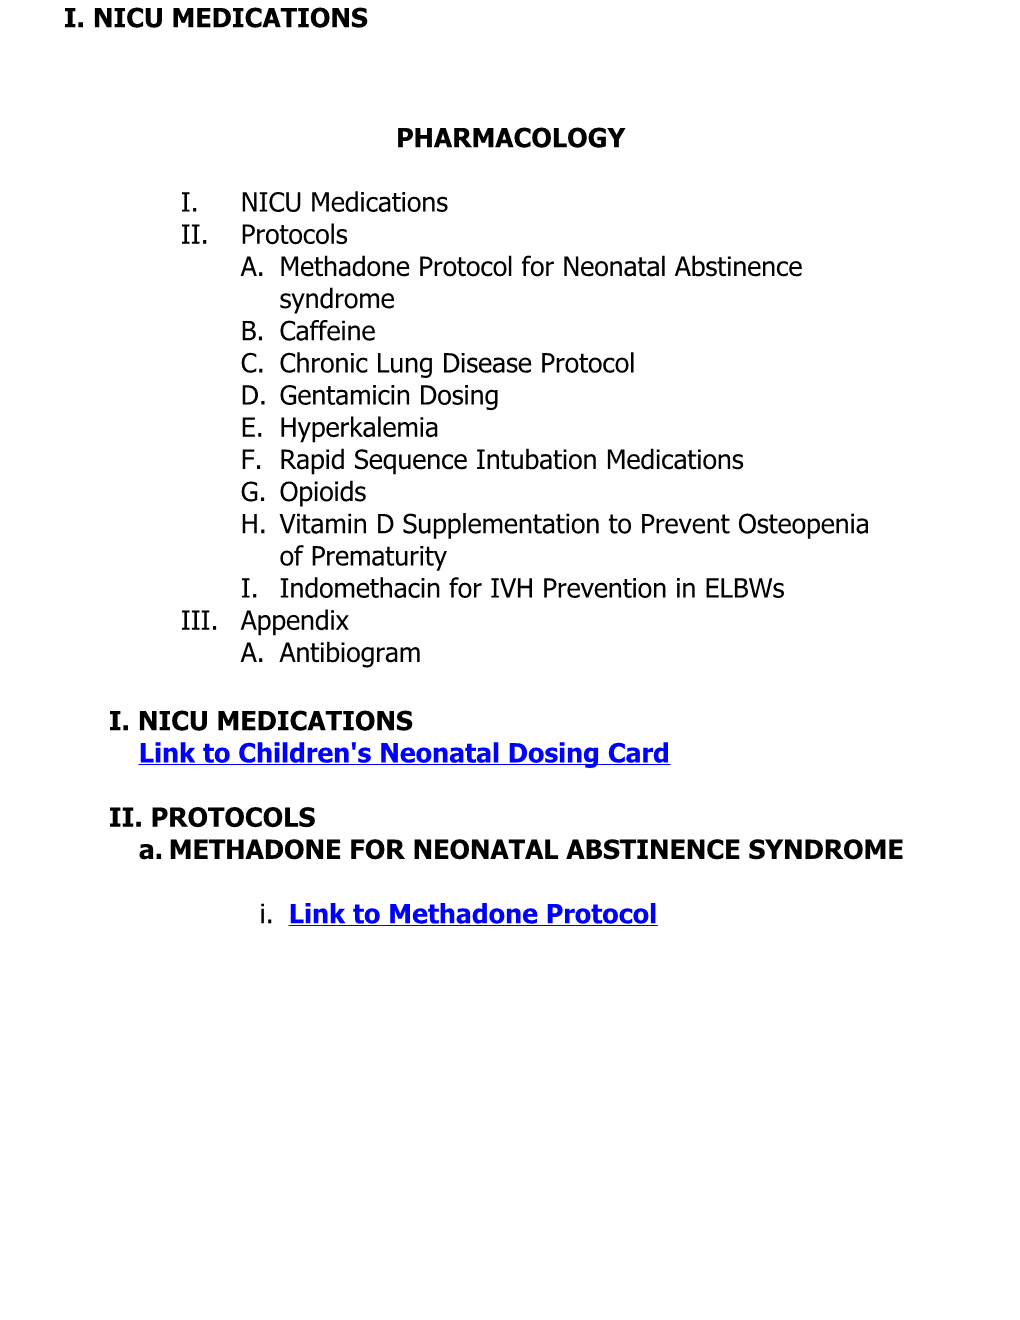 A. Methadone Protocol for Neonatal Abstinence Syndrome